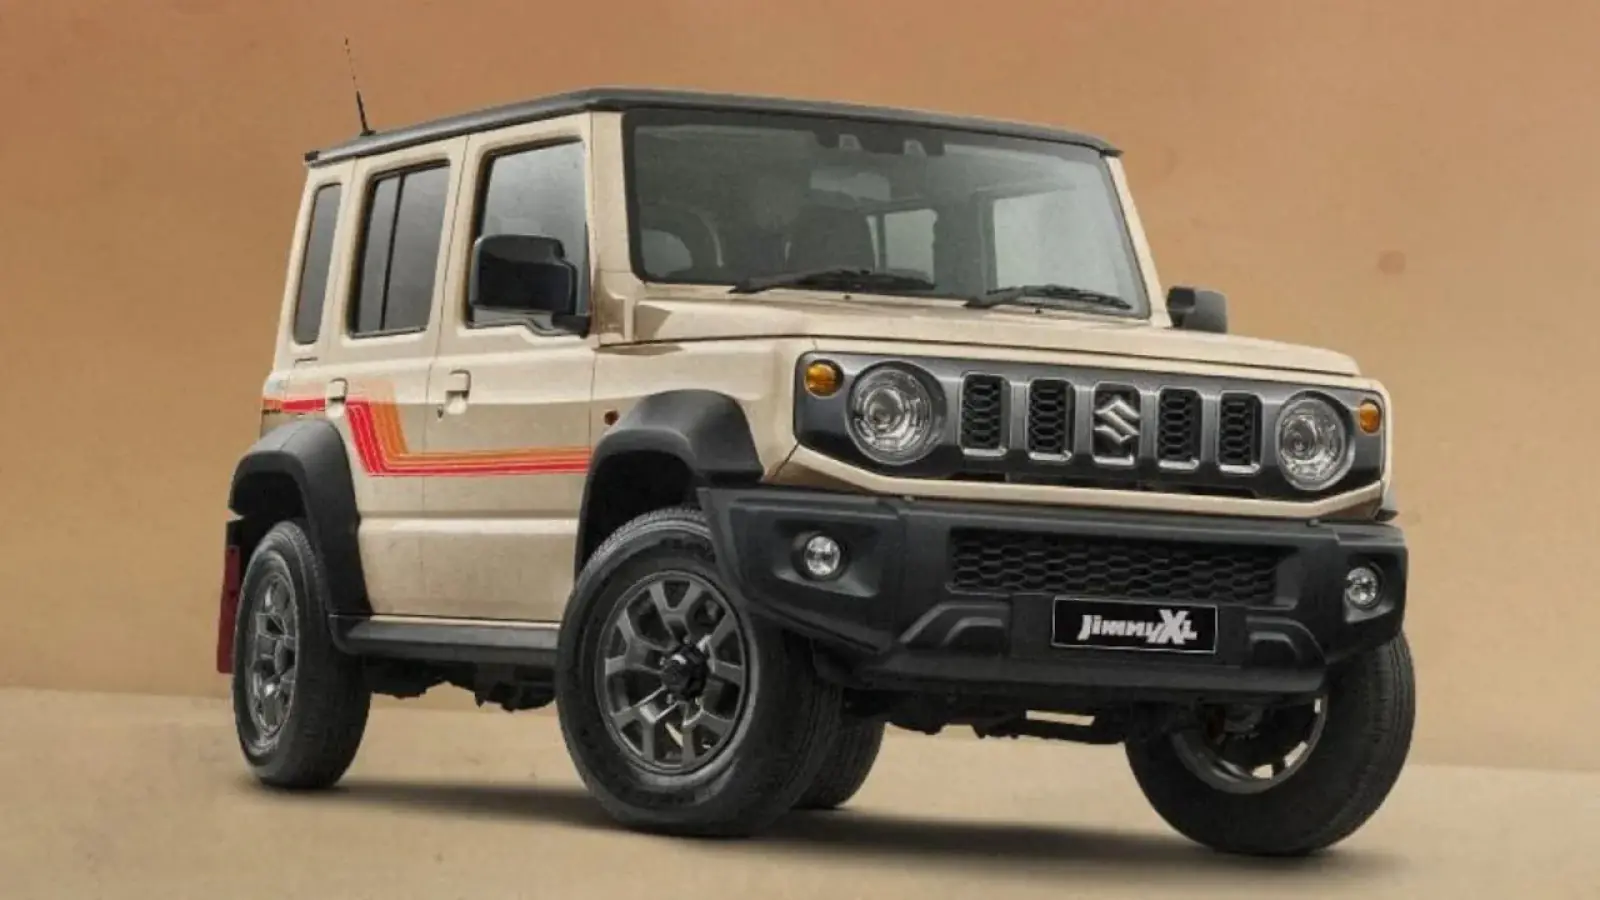 Suzuki Jimny 5-door Heritage Edition introduced, only so many customers will be able to buy this special model